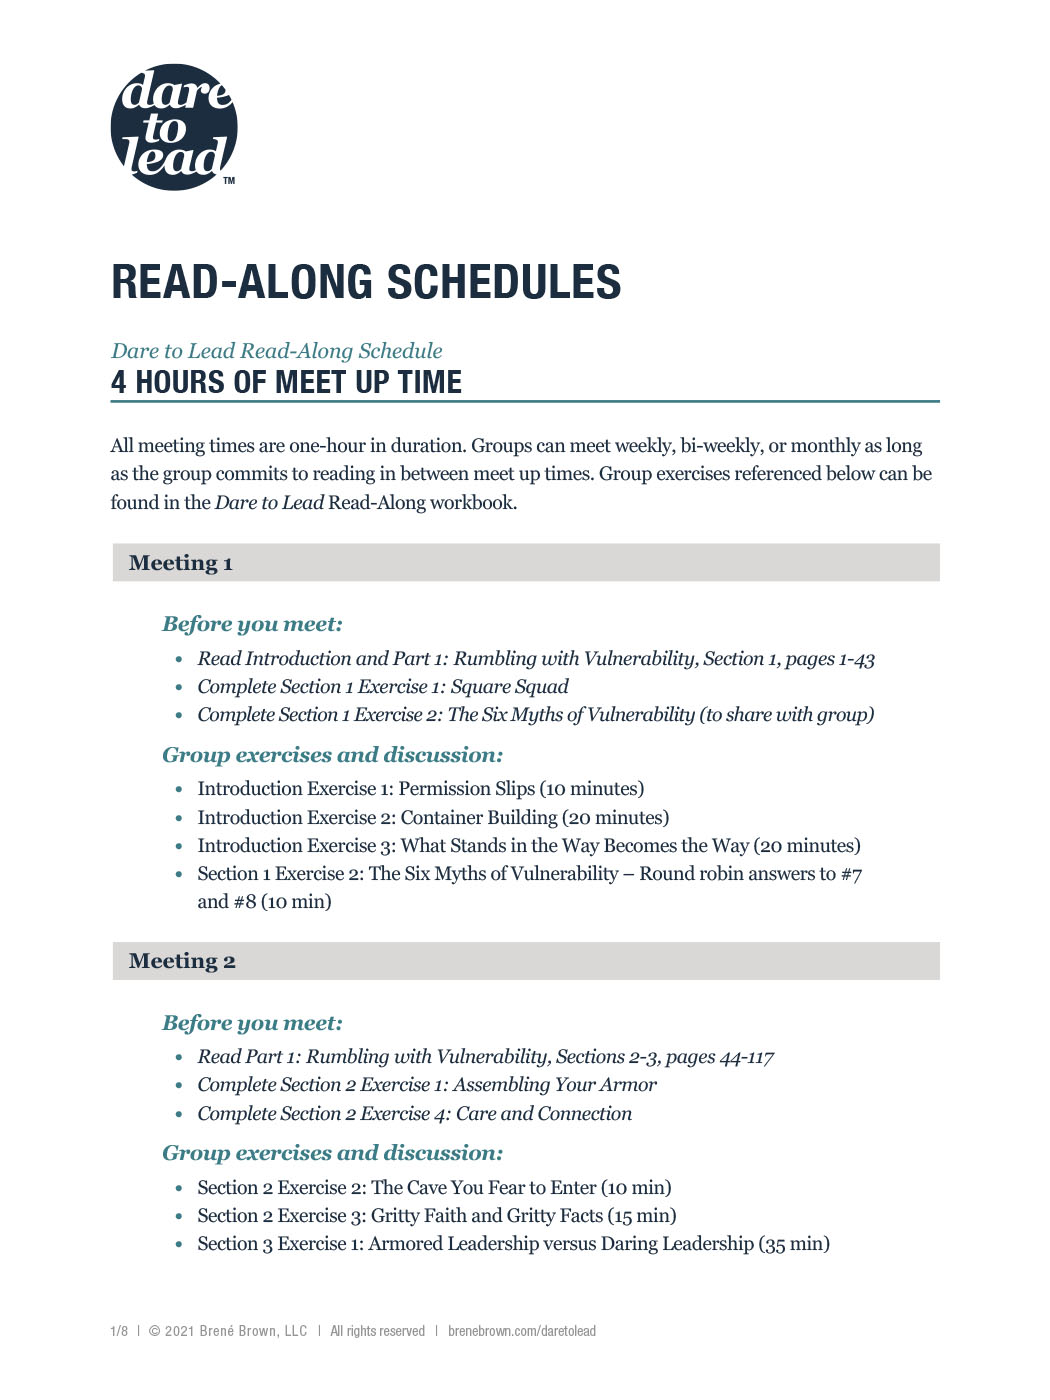 Dare to Lead Read-Along Schedules